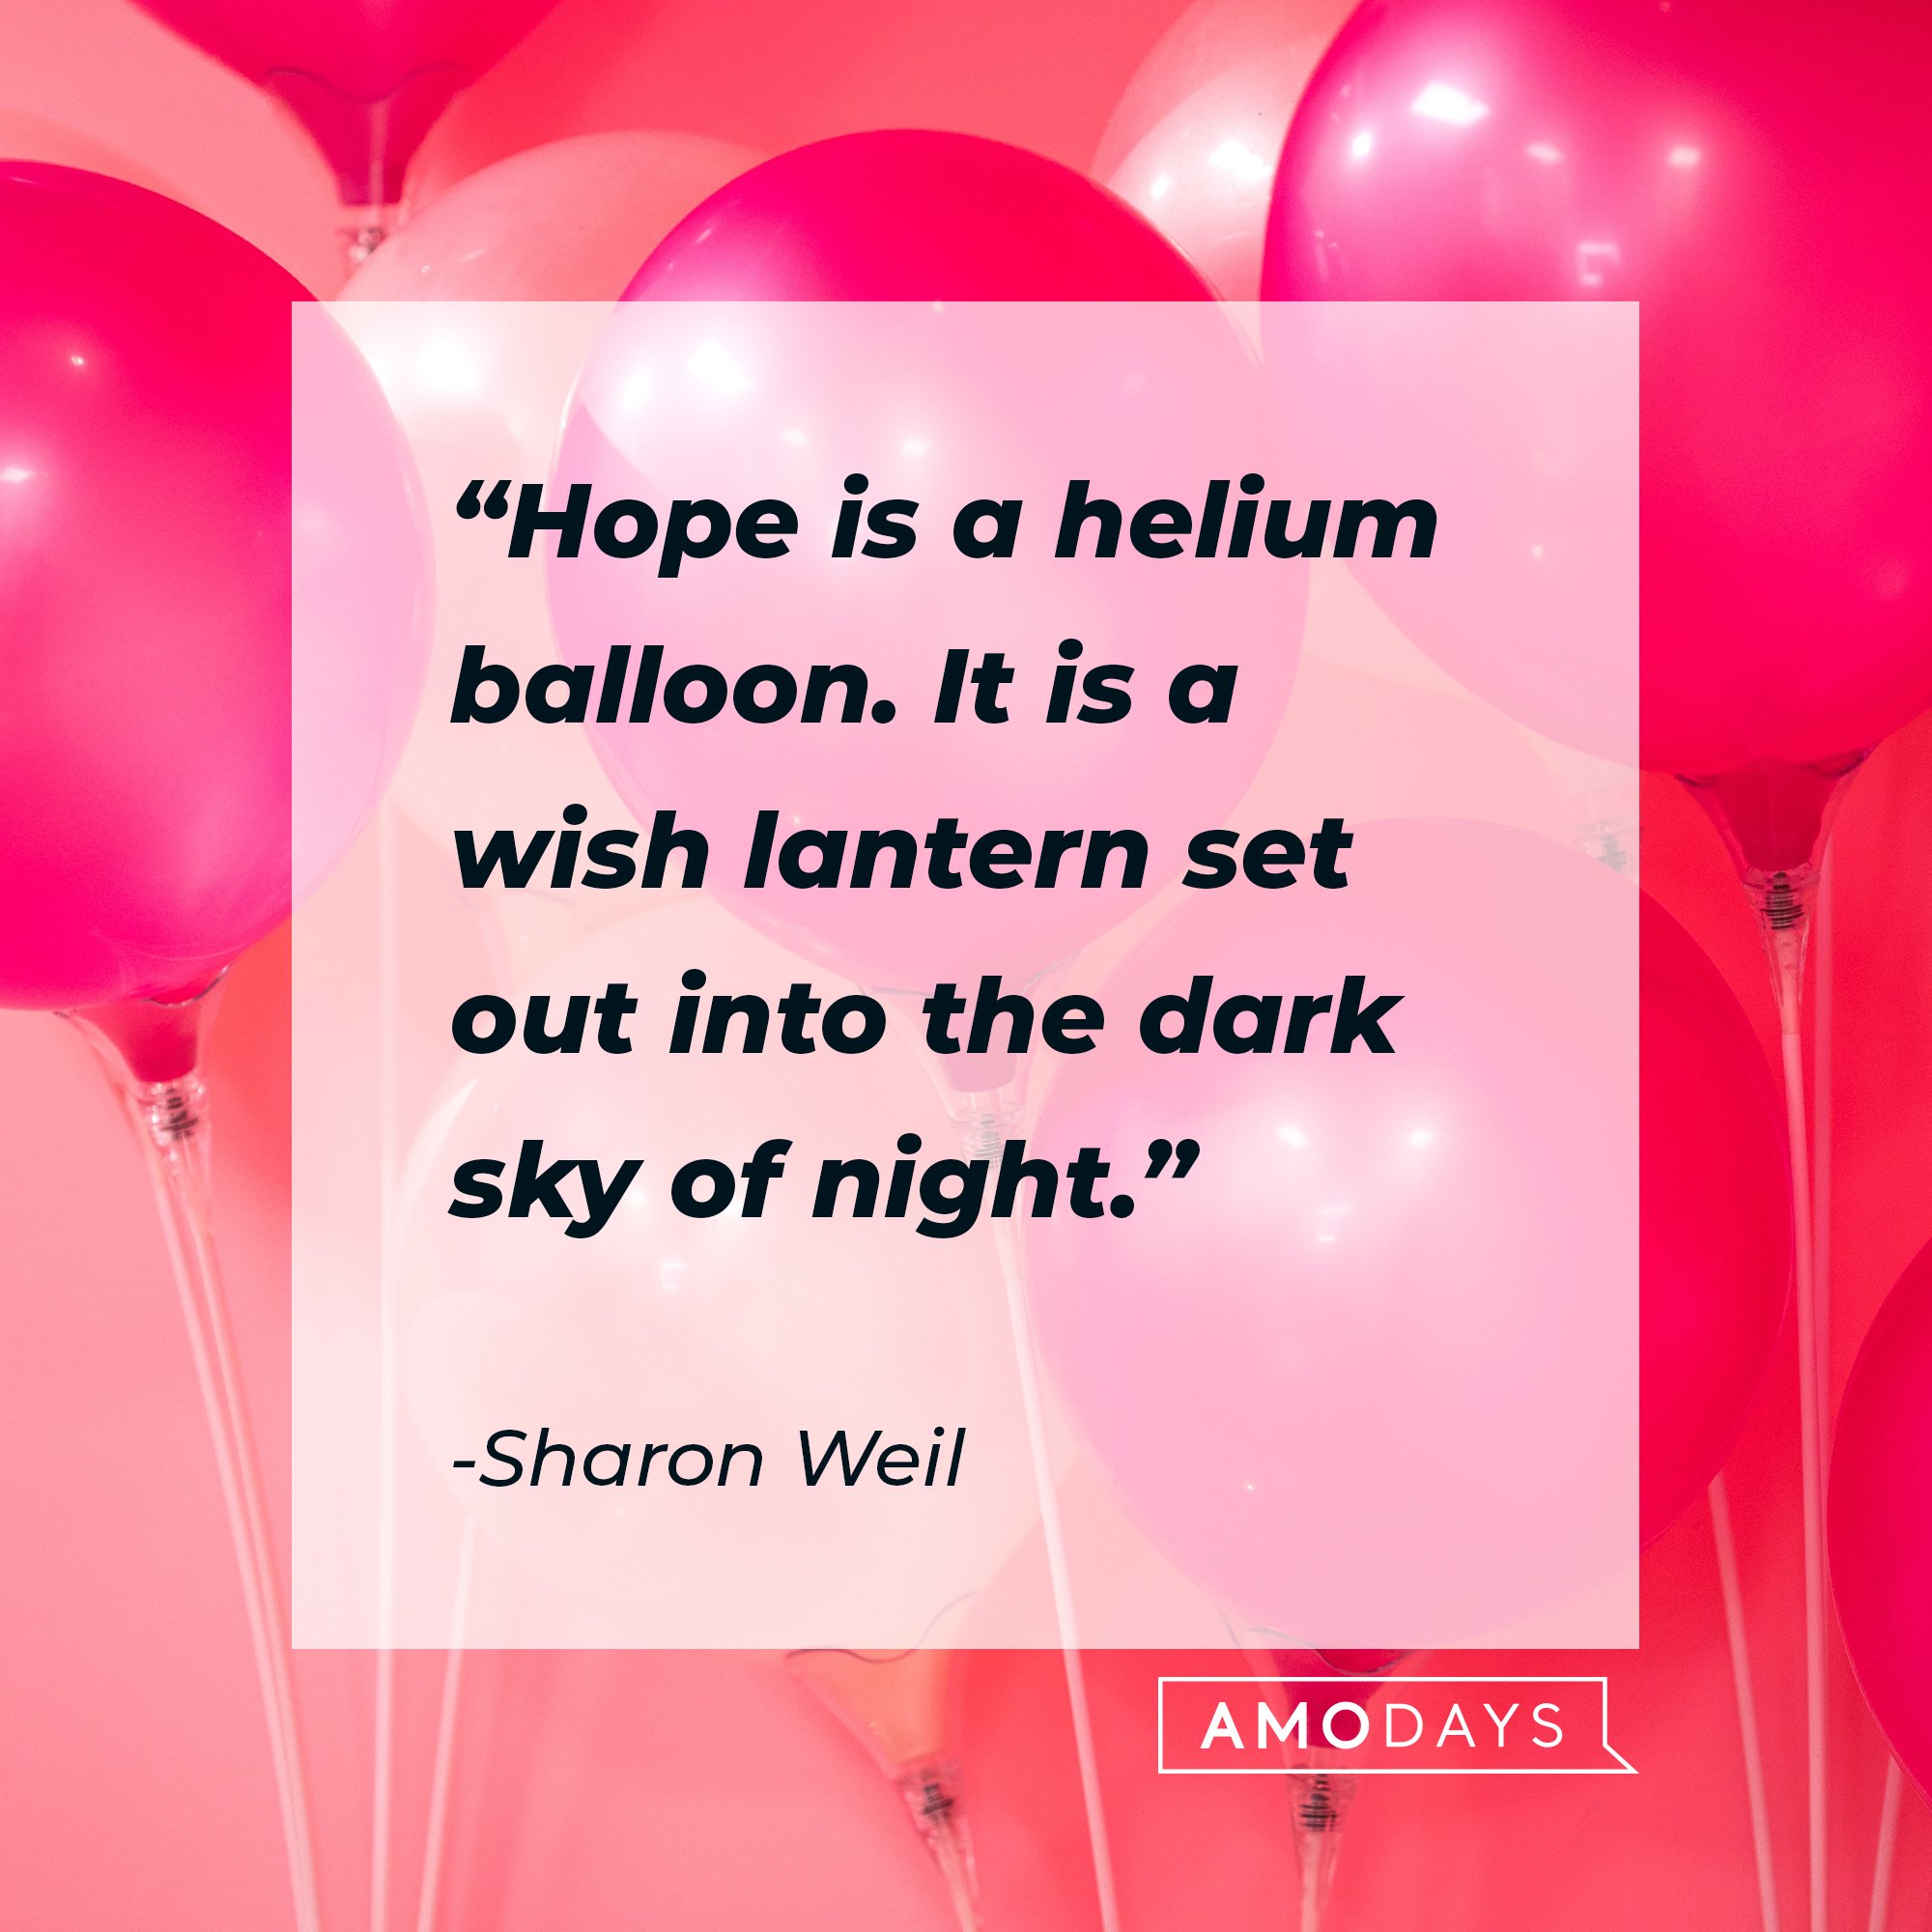 Sharon Weil’s quote: "Hope is a helium balloon. It is a wish lantern set out into the dark sky of night." | Image: AmoDays